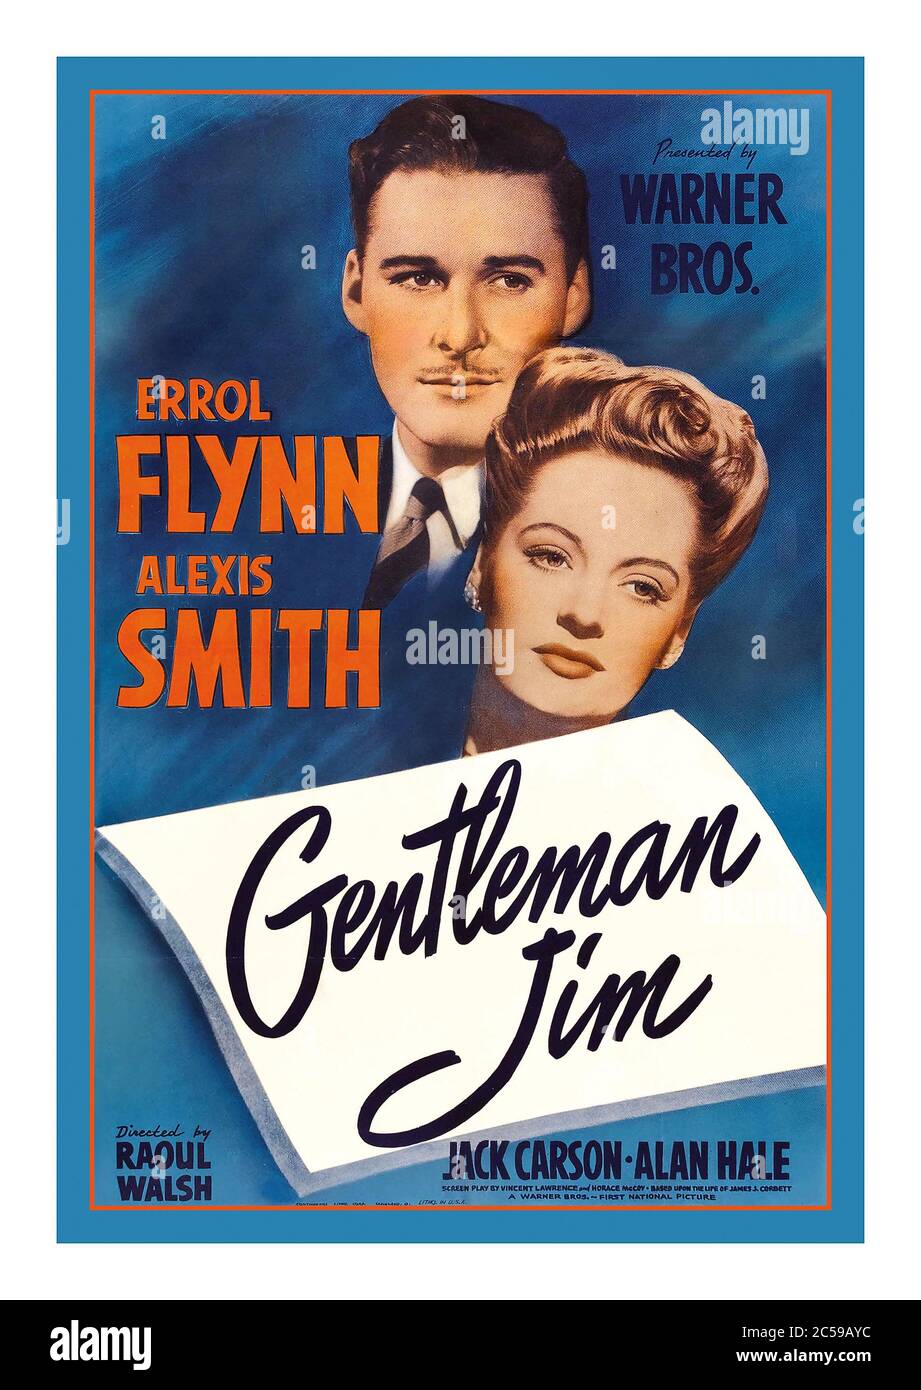 Vintage 1940's Cinema Movie Film Poster 'Gentleman Jim' is a 1942 film starring Errol Flynn as heavyweight boxing champion James J. Corbett (1866–1933). The supporting cast includes Alexis Smith, Jack Carson, Alan Hale, William Frawley, and Ward Bond. The movie was based upon Corbett's 1894 autobiography, The Roar of the Crowd, and directed by Raoul Walsh. The role was one of Flynn's favorites. Stock Photo